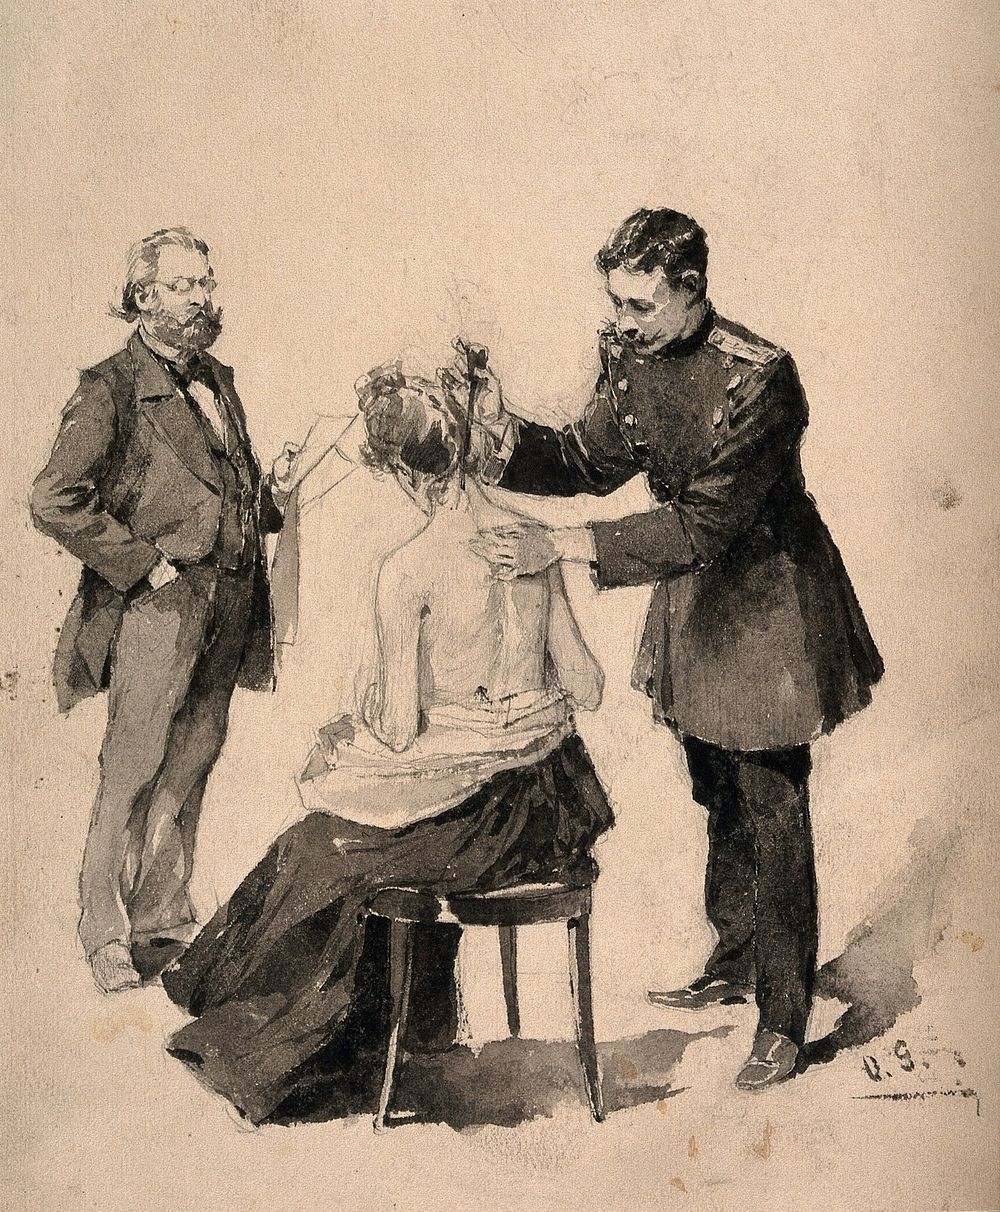 A young physician in military uniform applying an instrument to a woman's neck, while an older man with papers in hand is…